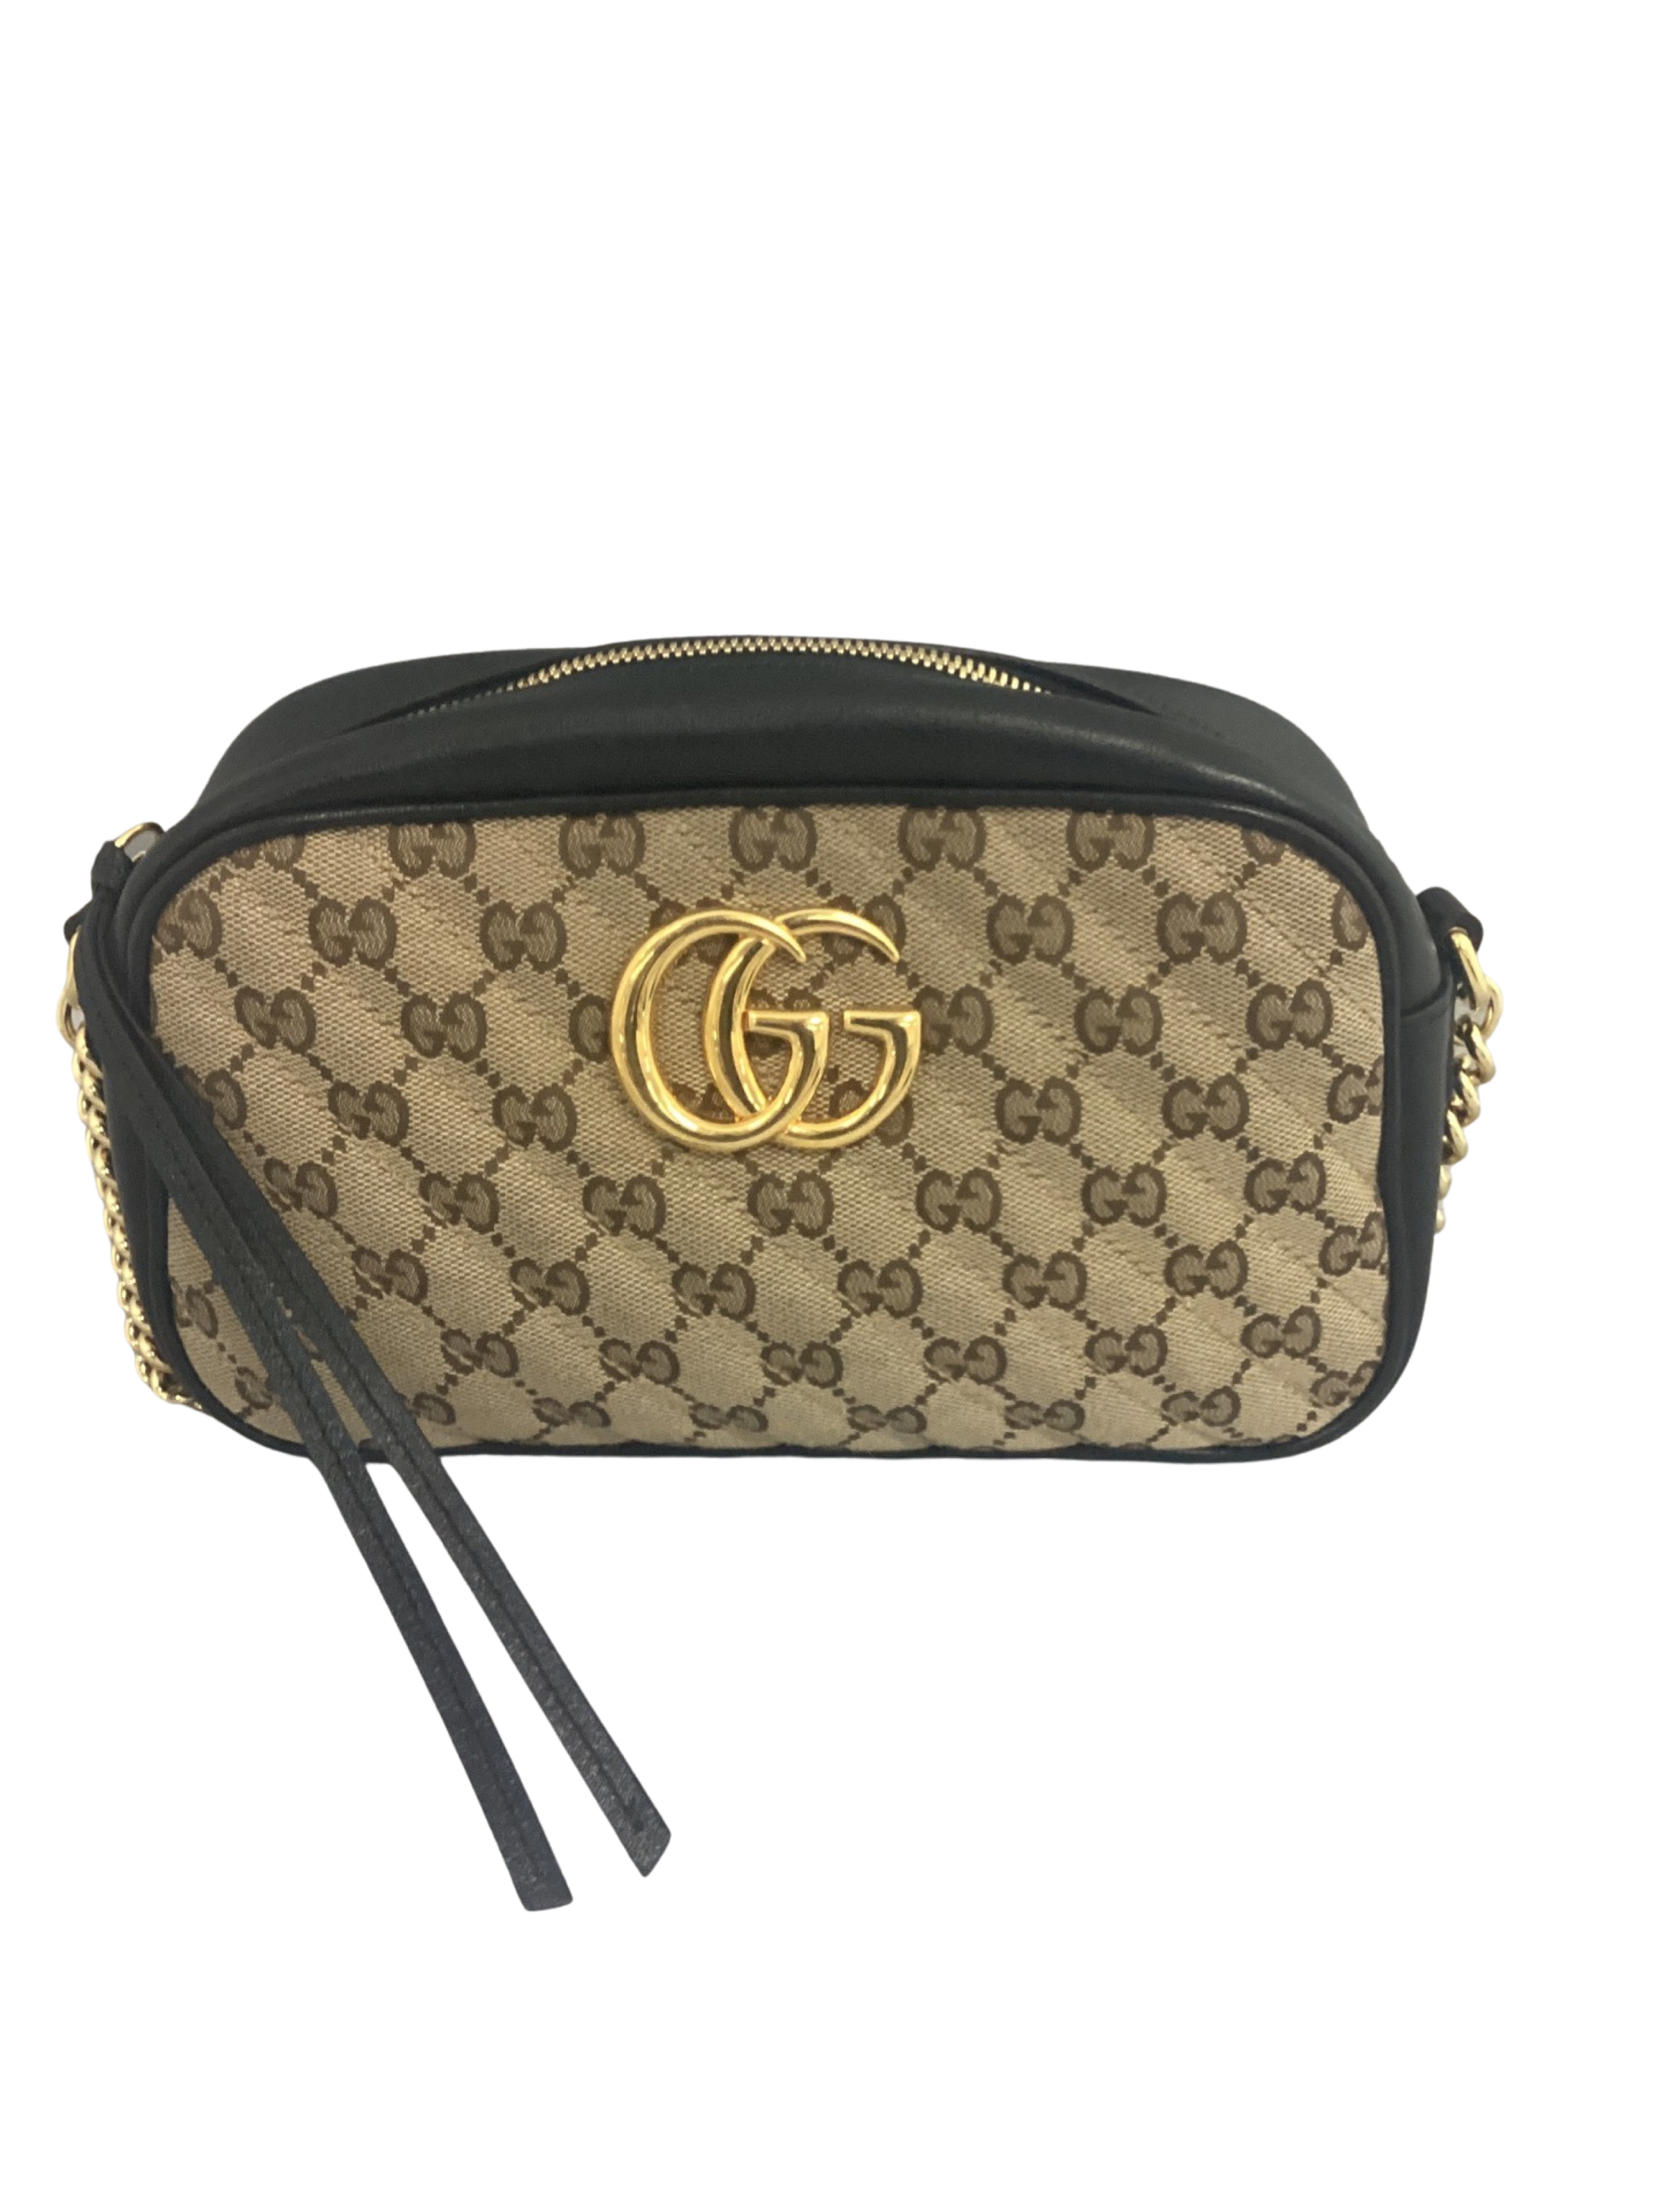 Gucci-GG Marmont Mini Shoulder Bag - Couture Traders